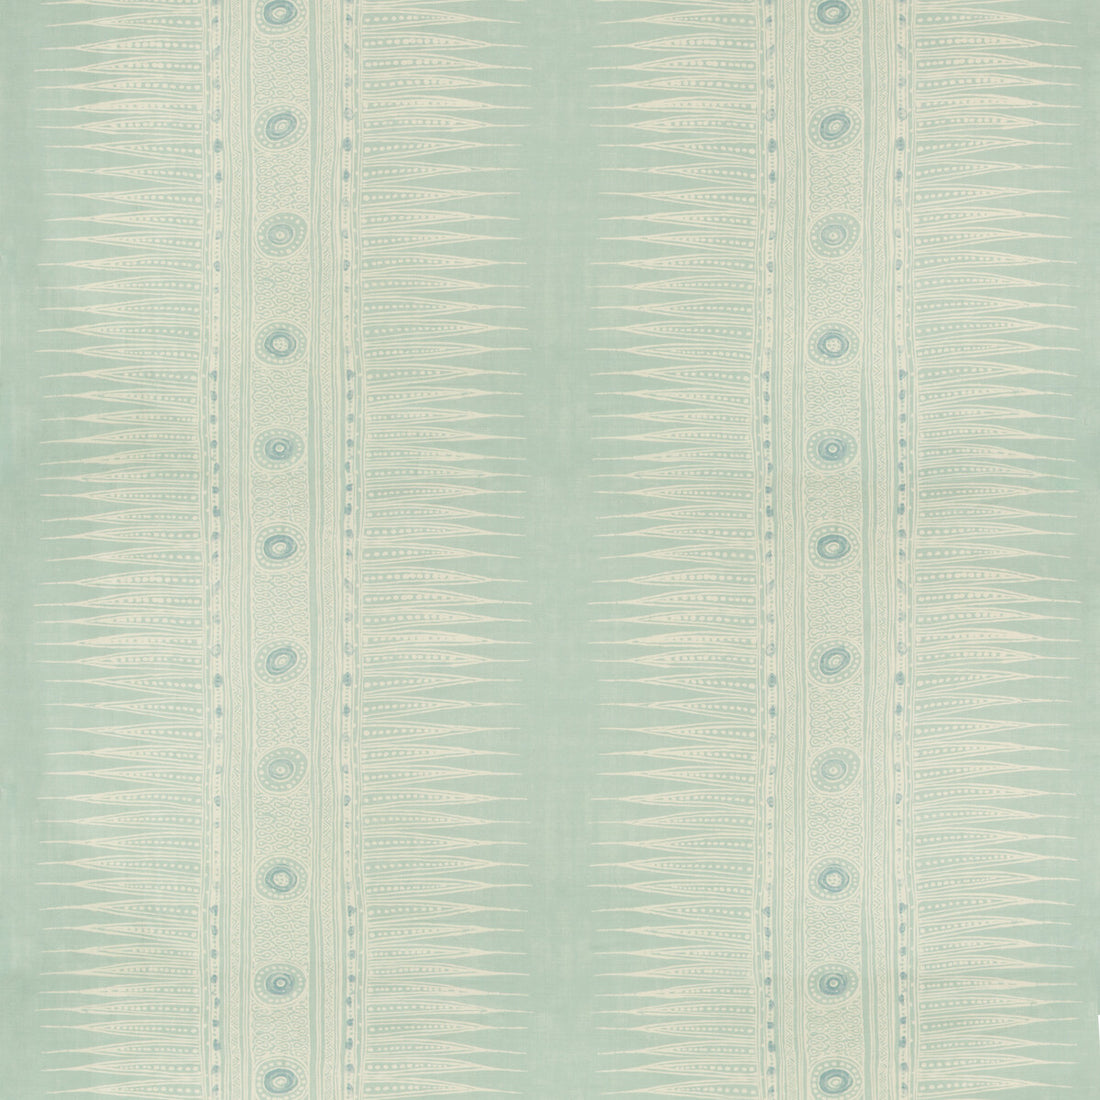 Indian Zag fabric in aqua color - pattern 2010136.135.0 - by Lee Jofa in the Suzanne Rheinstein III collection